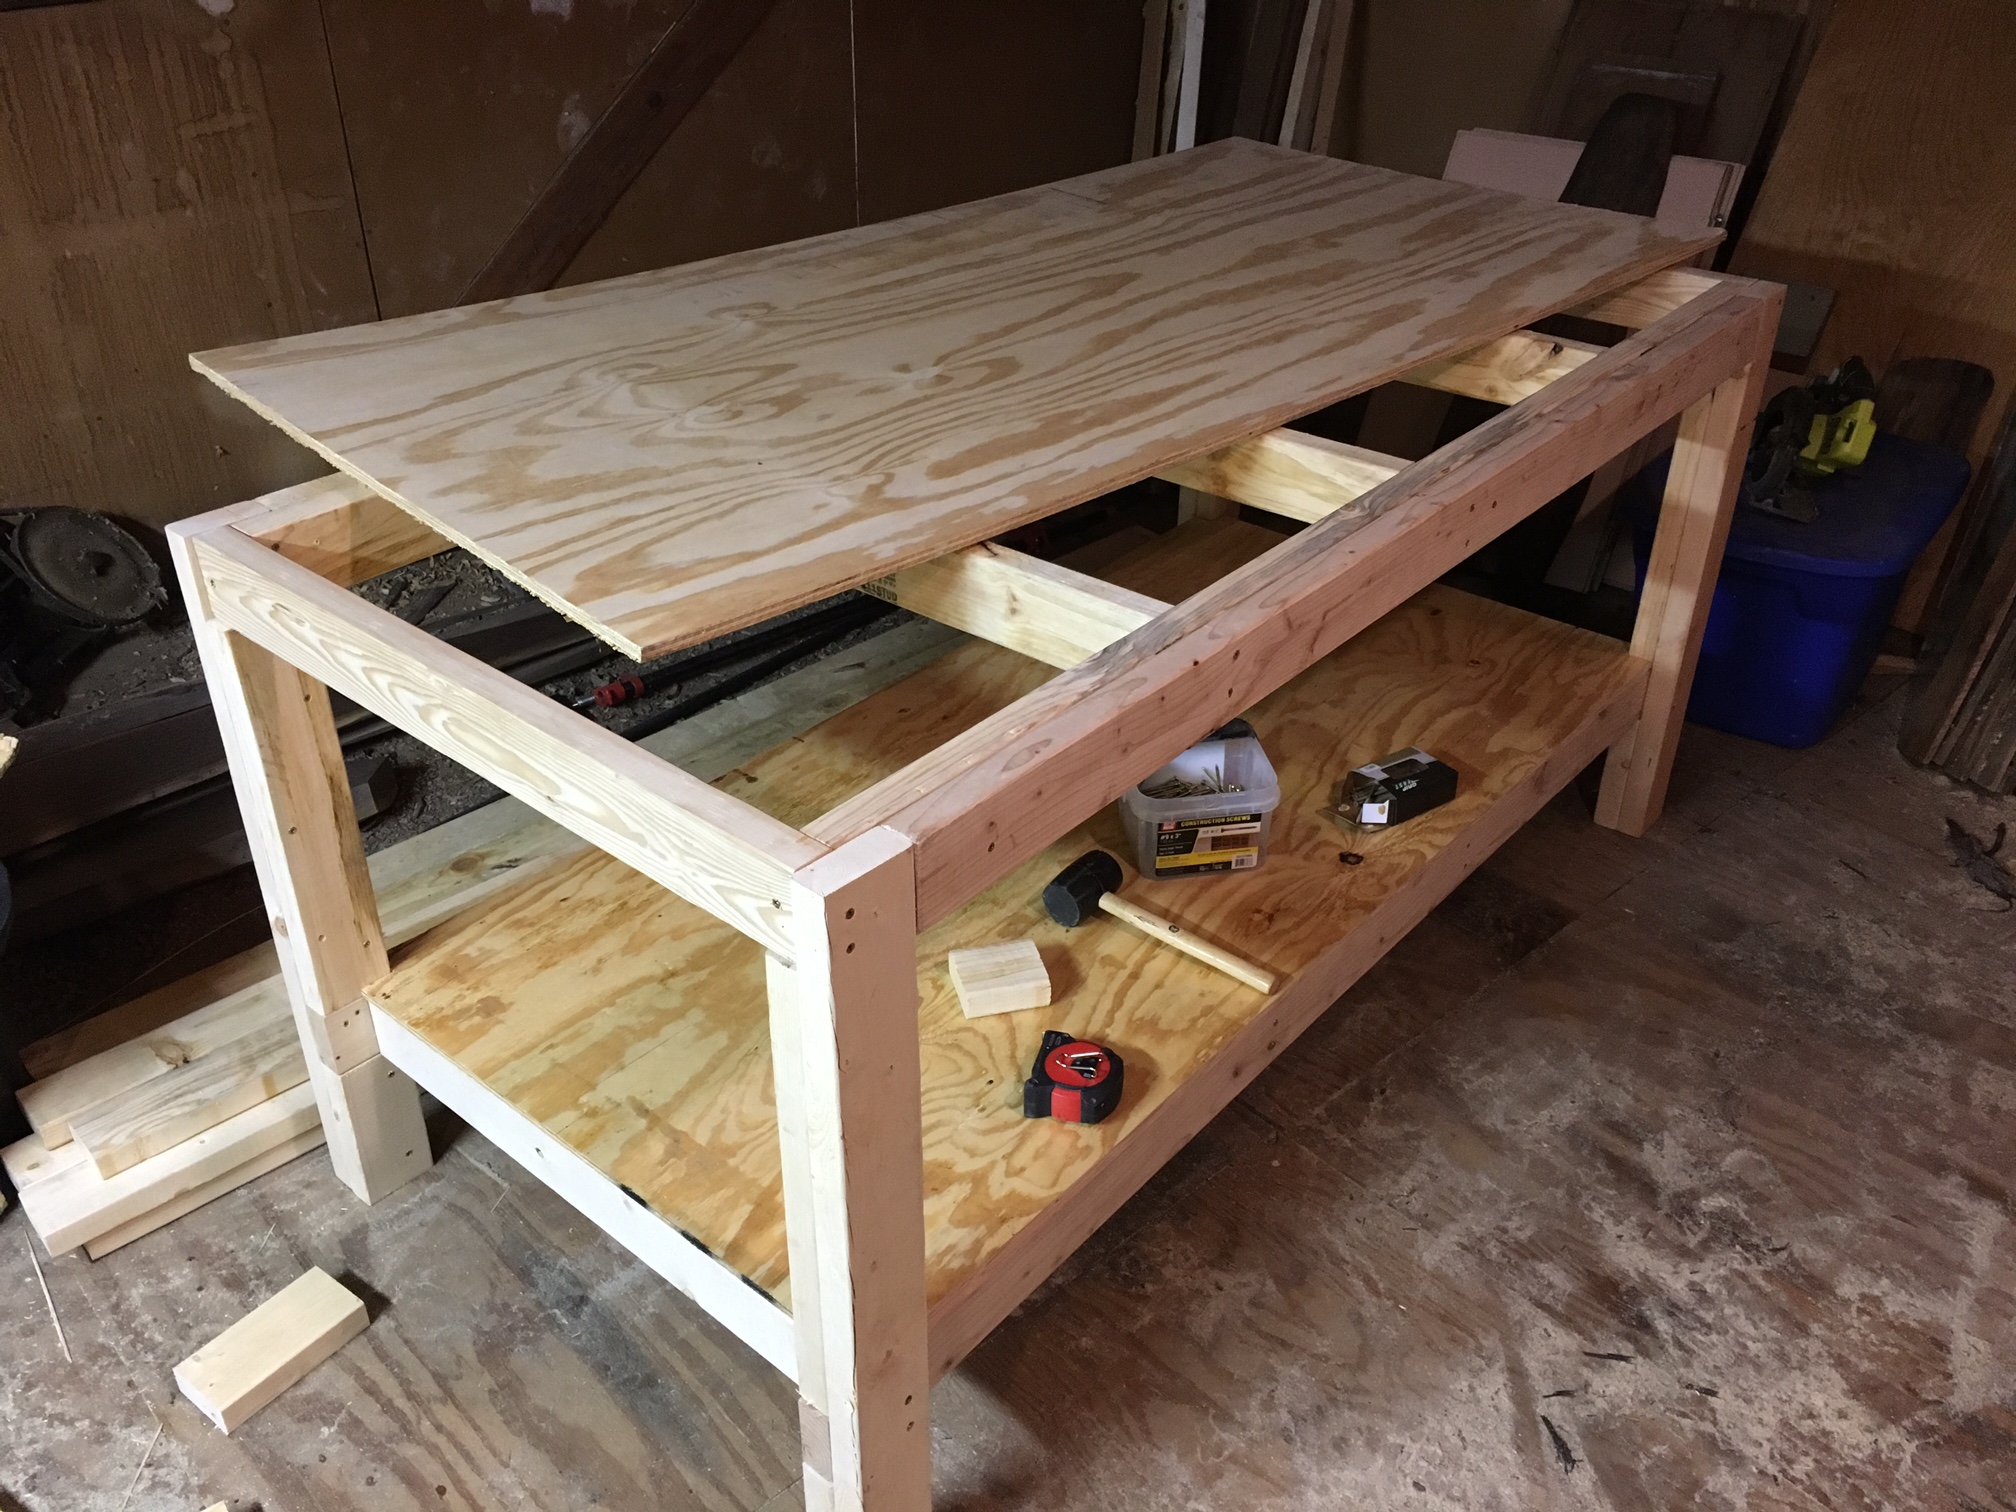 How To Build This Diy Workbench - vrogue.co